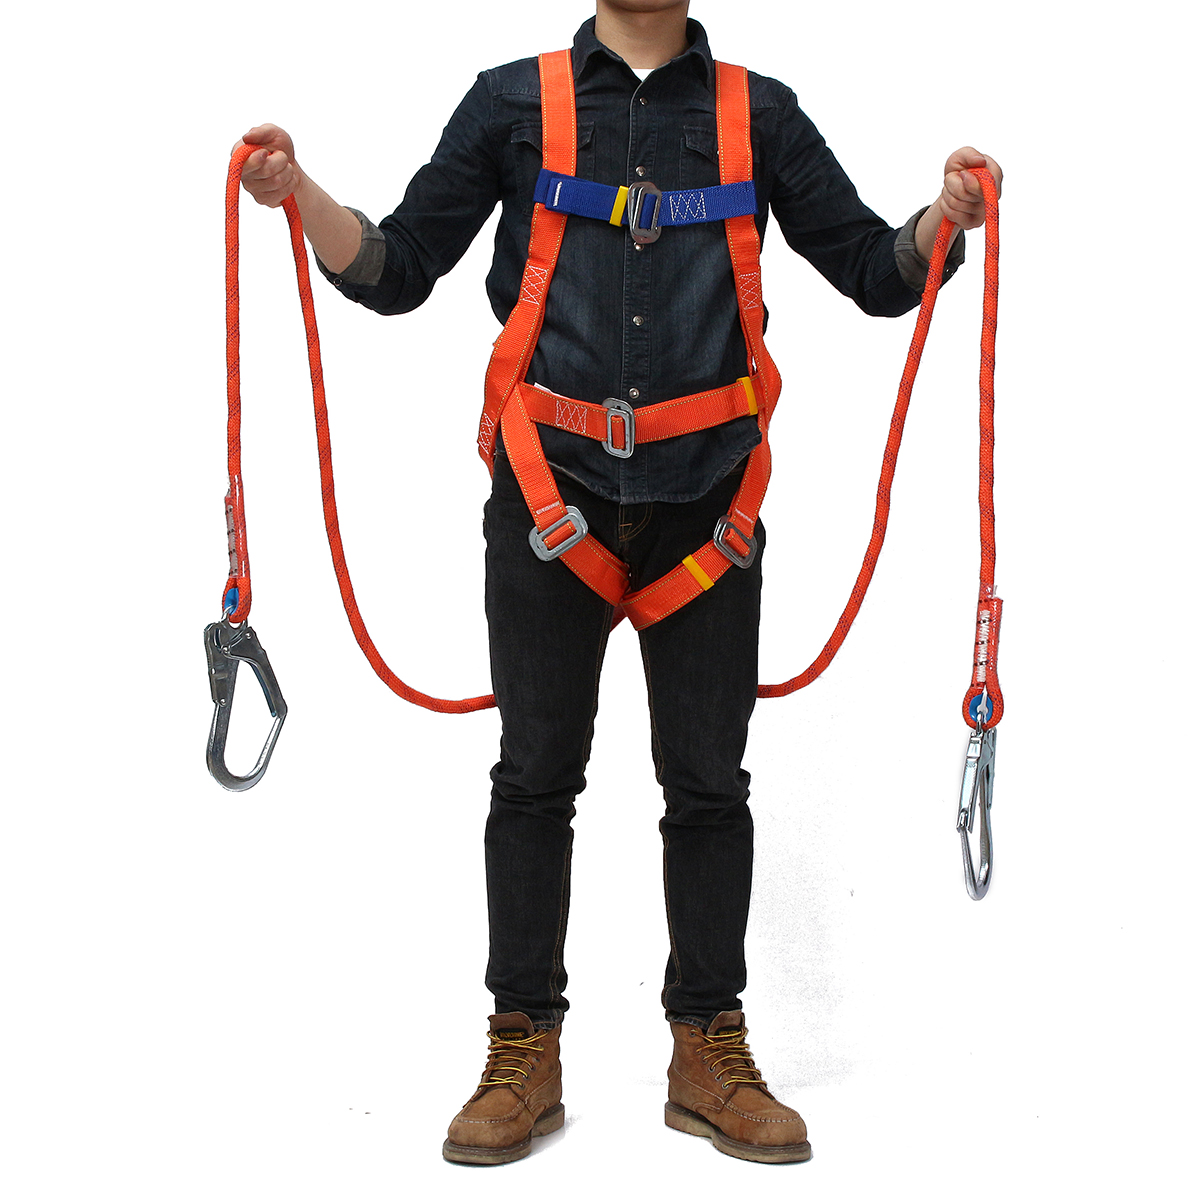 Outdoor-Full-Body-Climbing-Safety-Belt-Rescue-Rappelling-Aloft-Work-Suspension-Strap-Harness-1132532-8